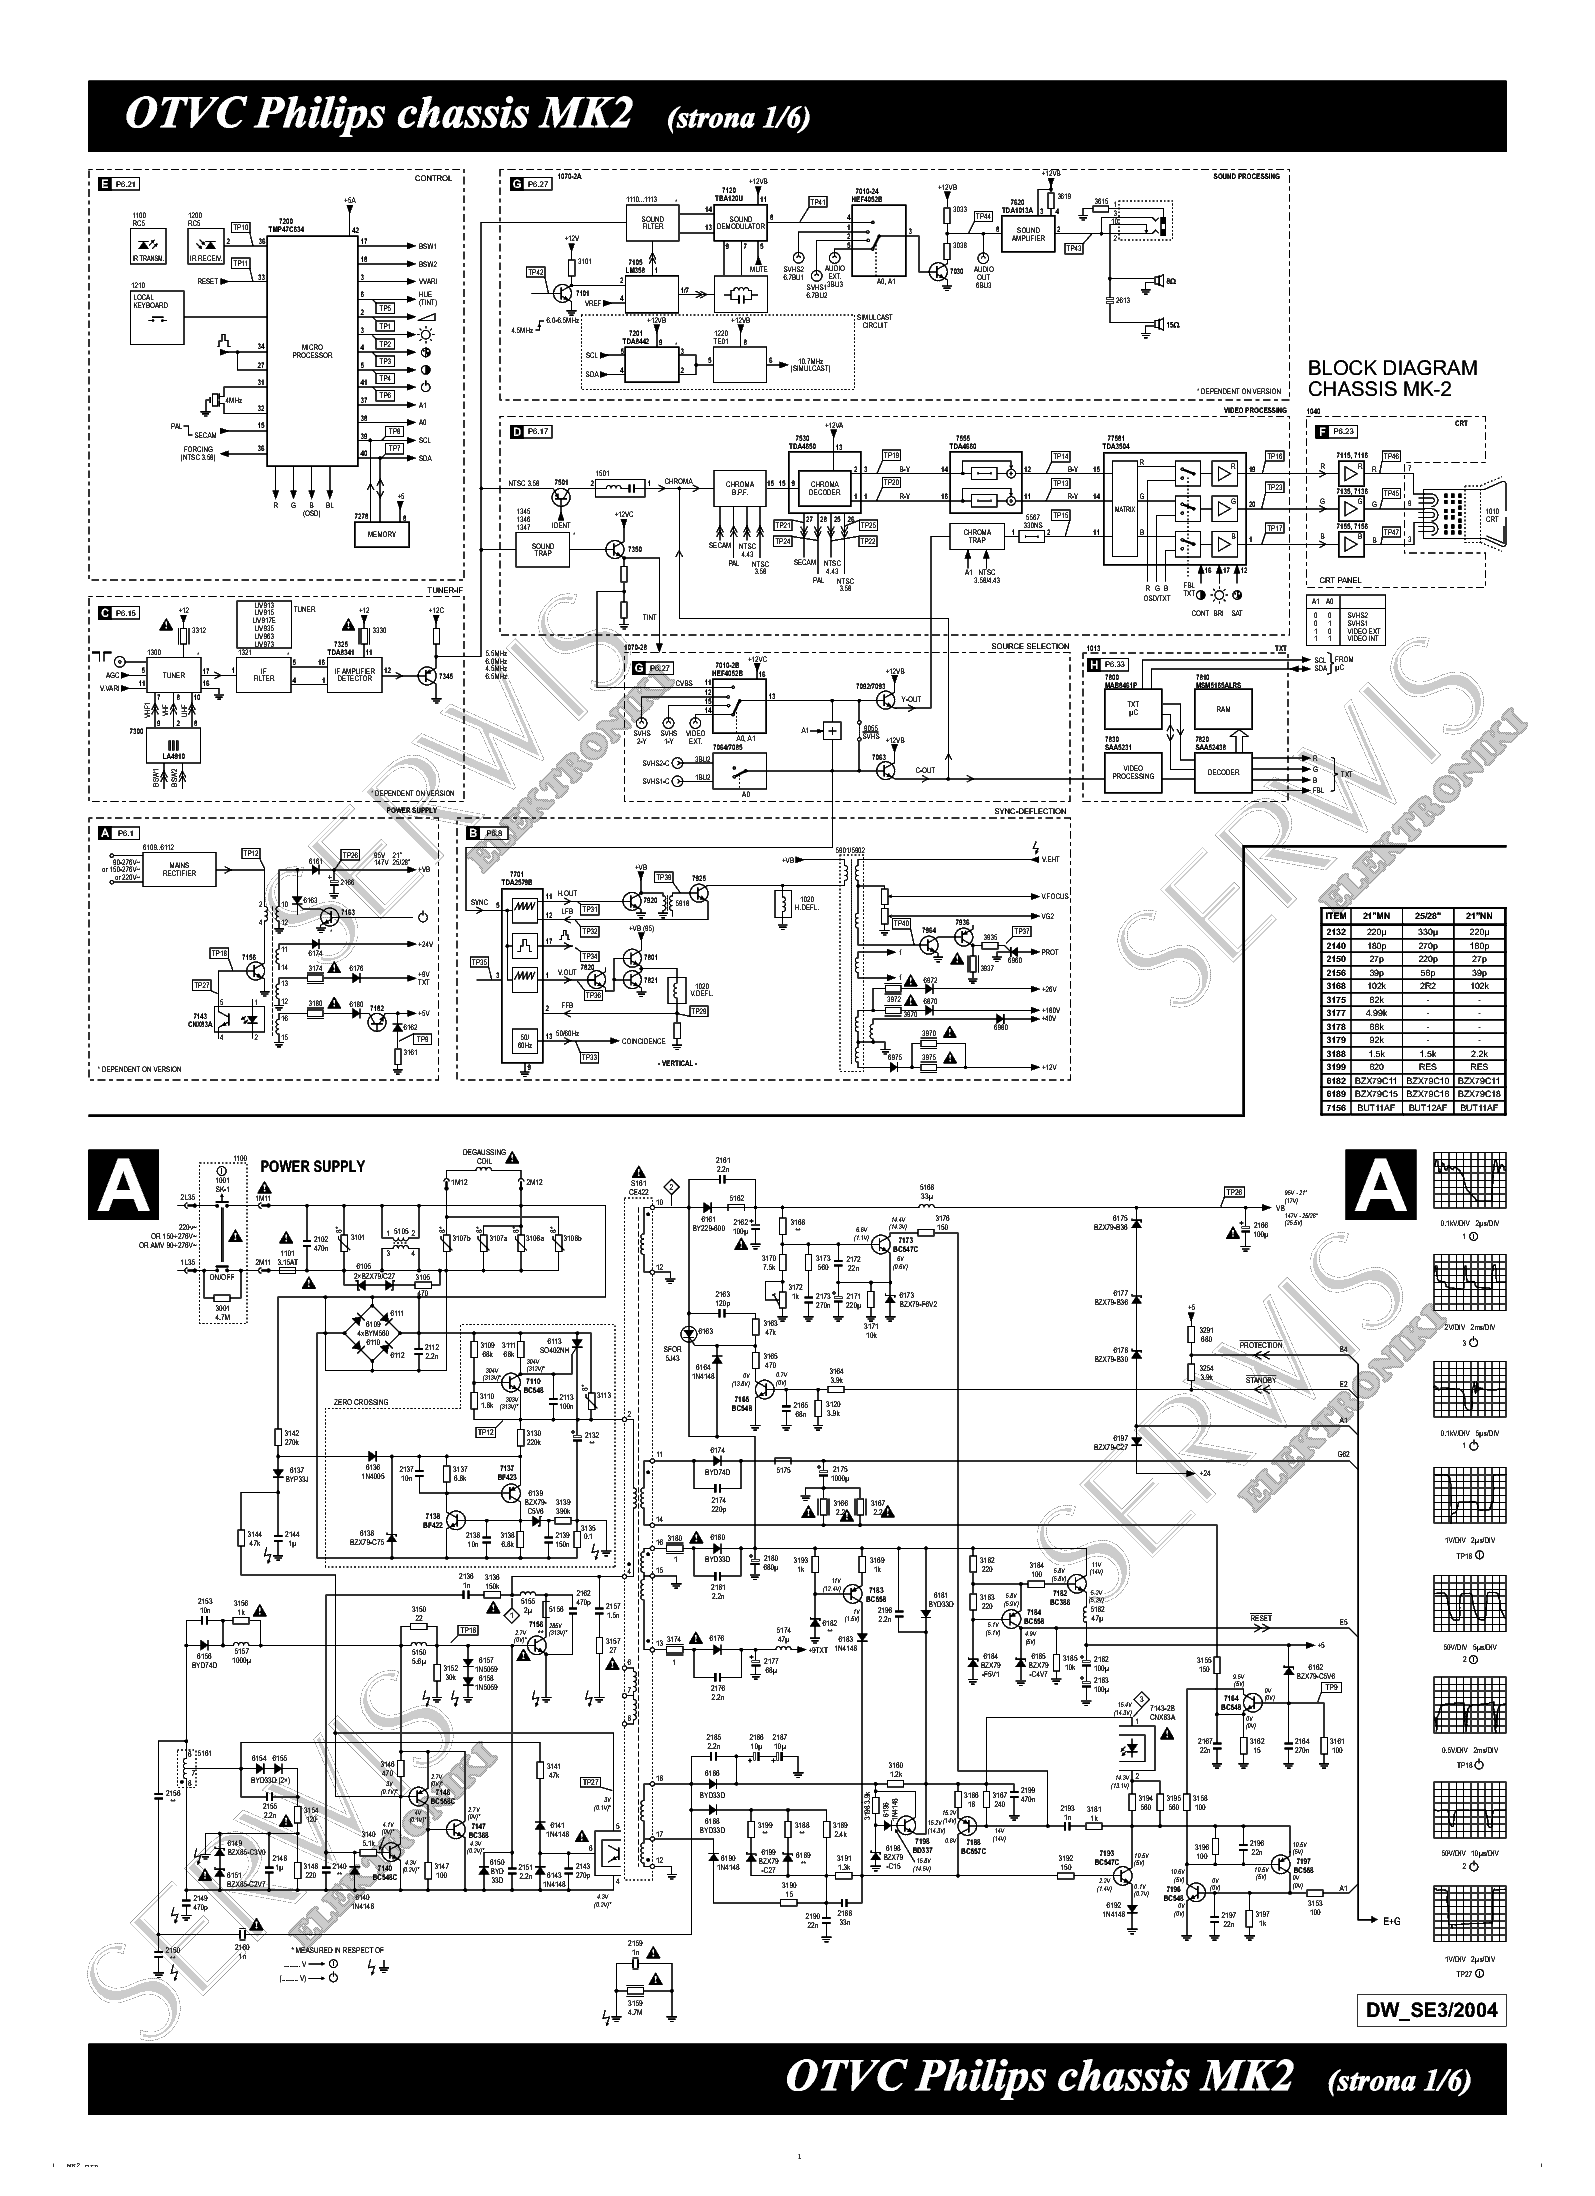 PHILIPS CHASSIS MK2 service manual (1st page)